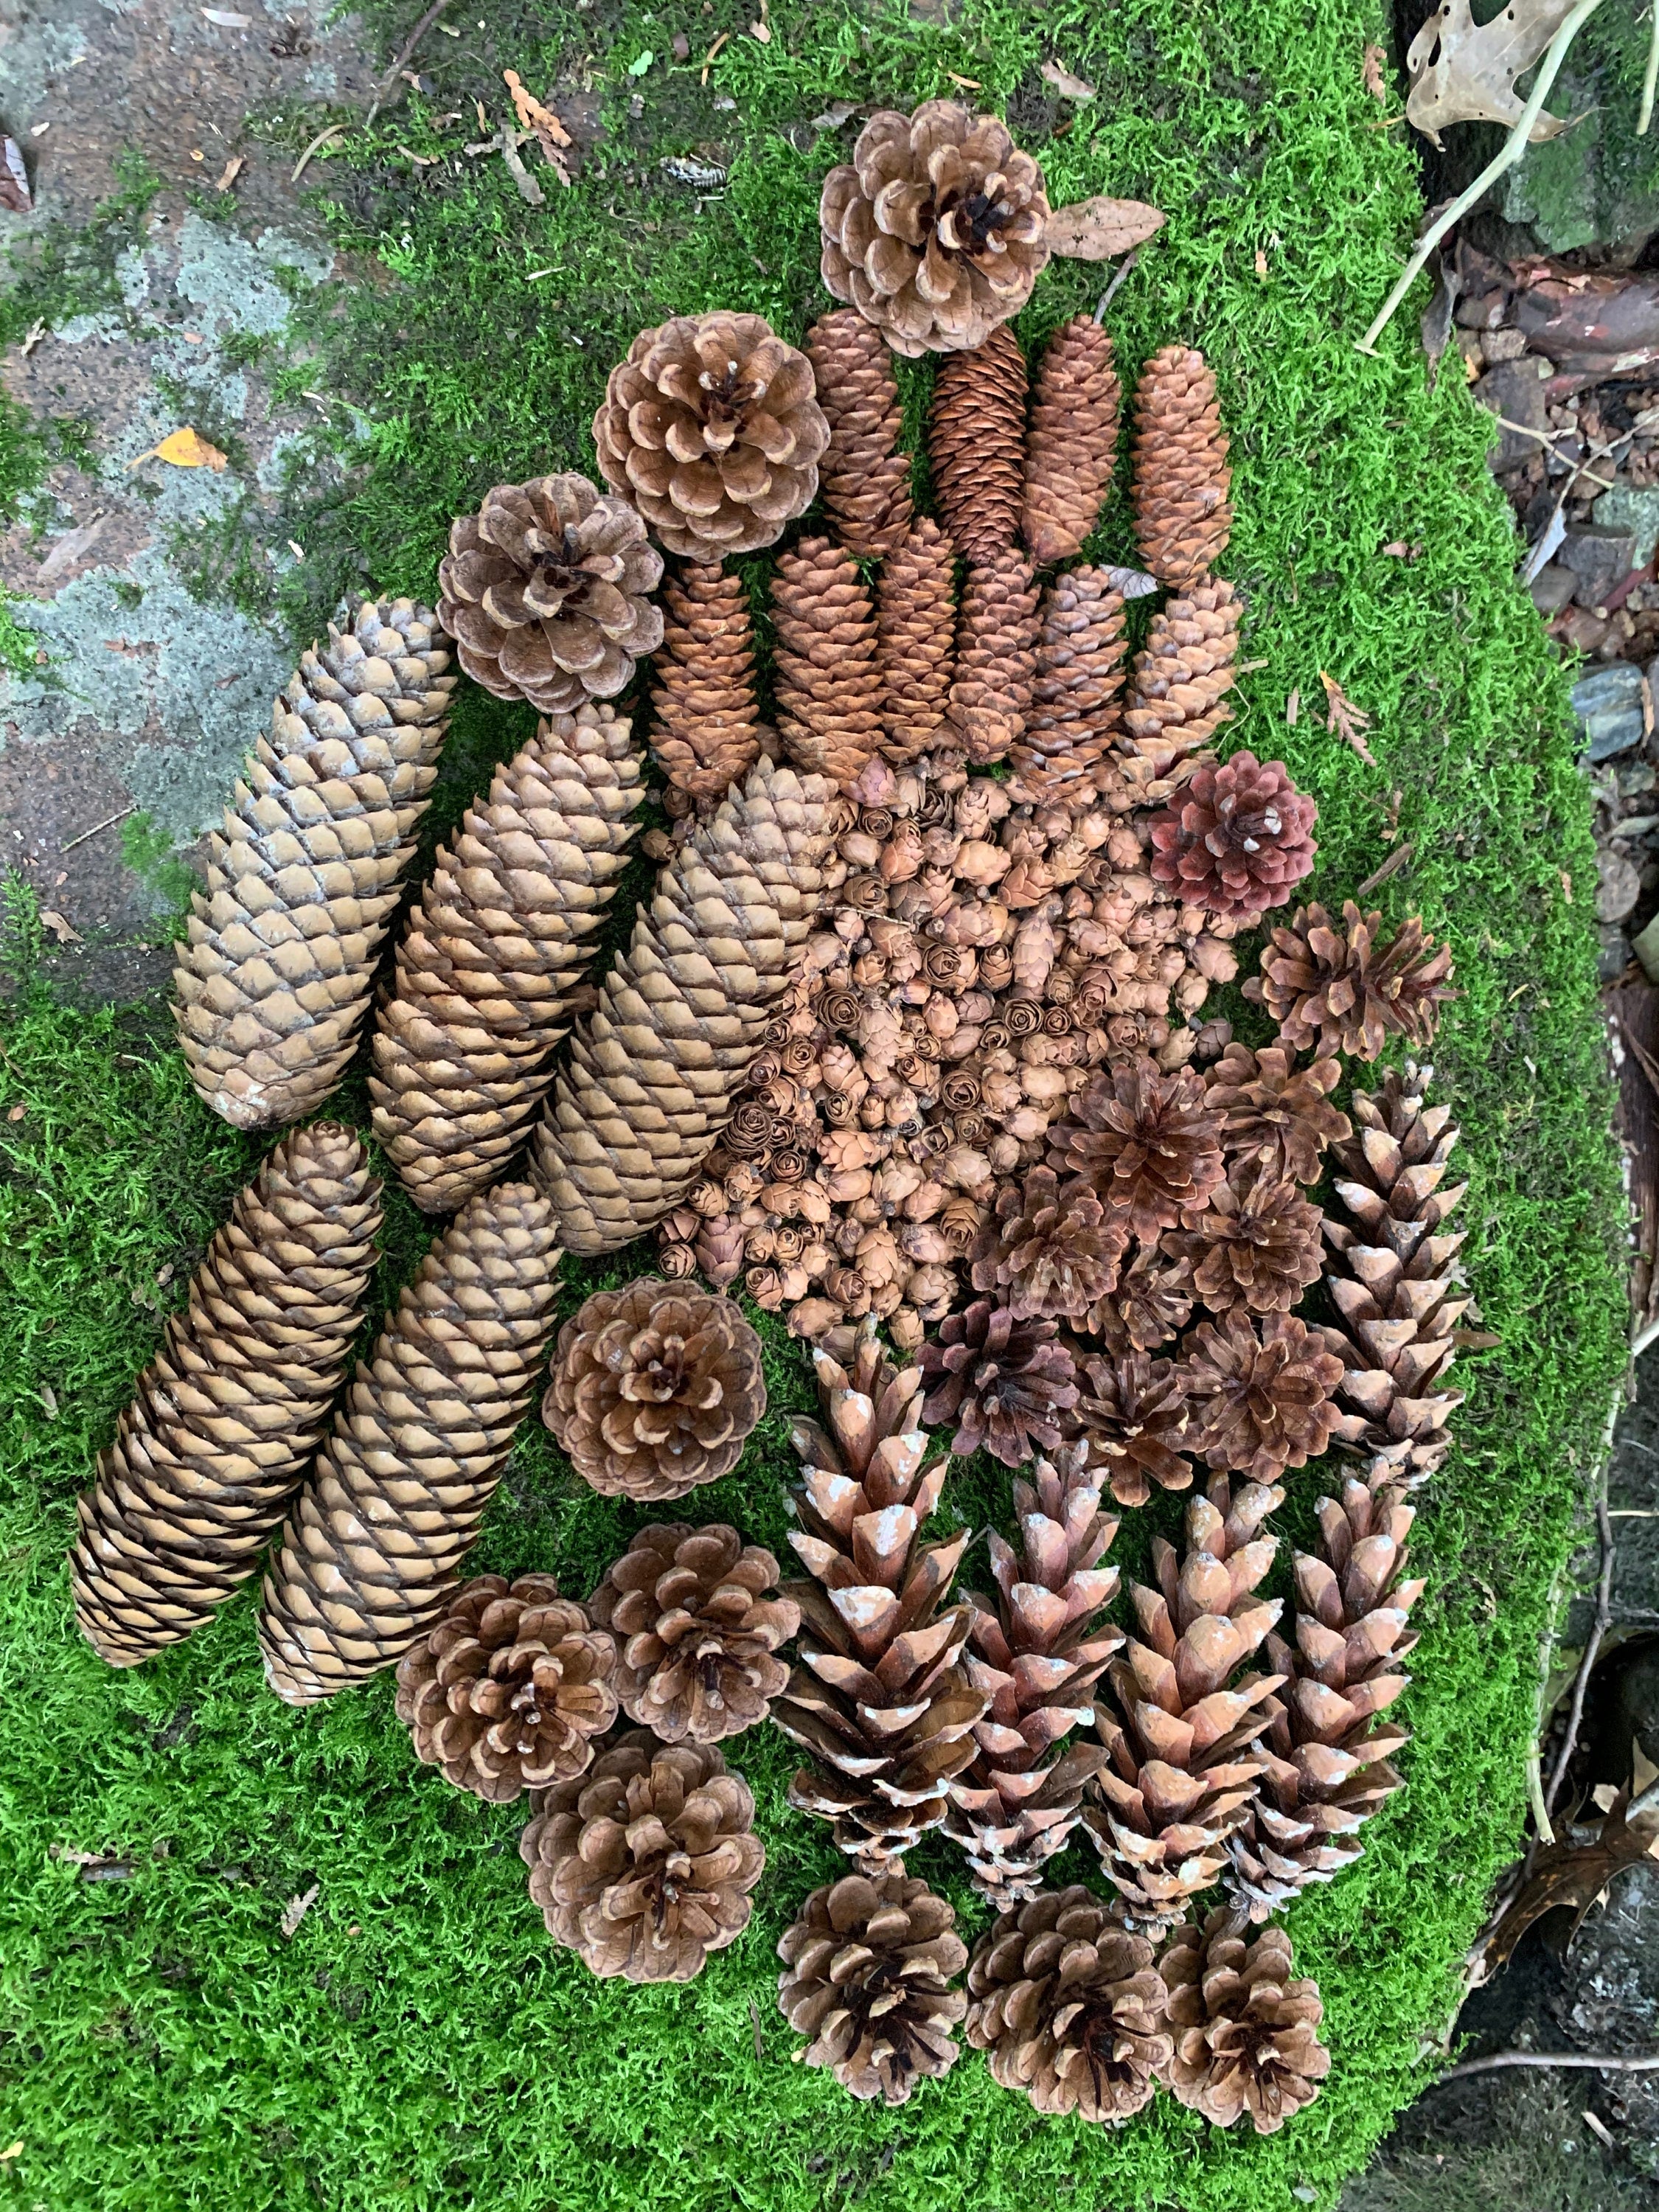 Pine Cone Assortment, 10 Red Pine, 5 White Pine, 5 Norway Spruce, 10 White Spruce, 10 Jack Pine, 2 Ounces of Tamarack Cones